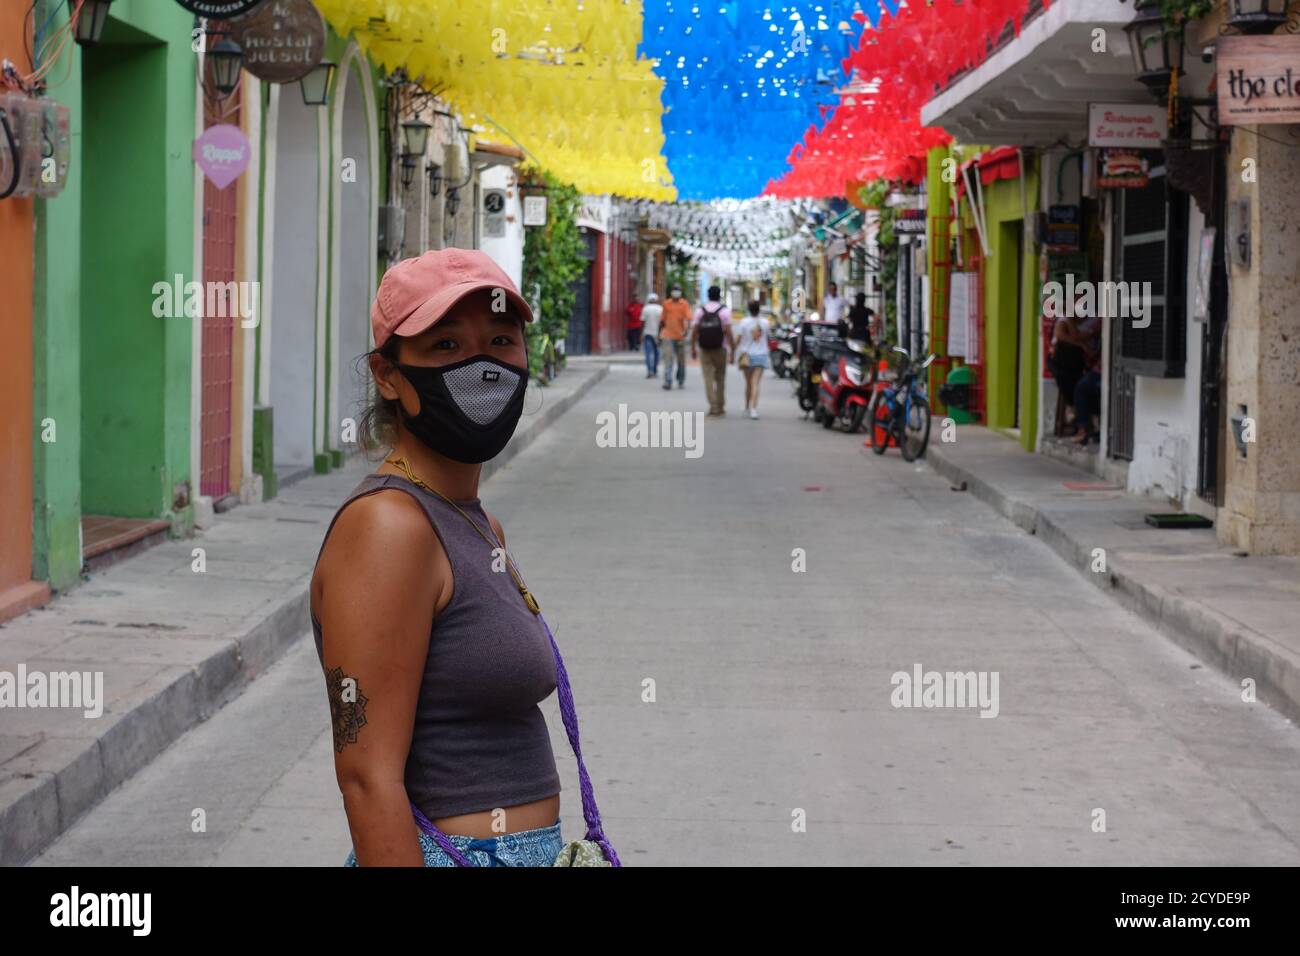 Woman with multiple use face mask and sunglasses under flags during the covid-19 quarantine in Cartagena, Colombia. 2020 Stock Photo